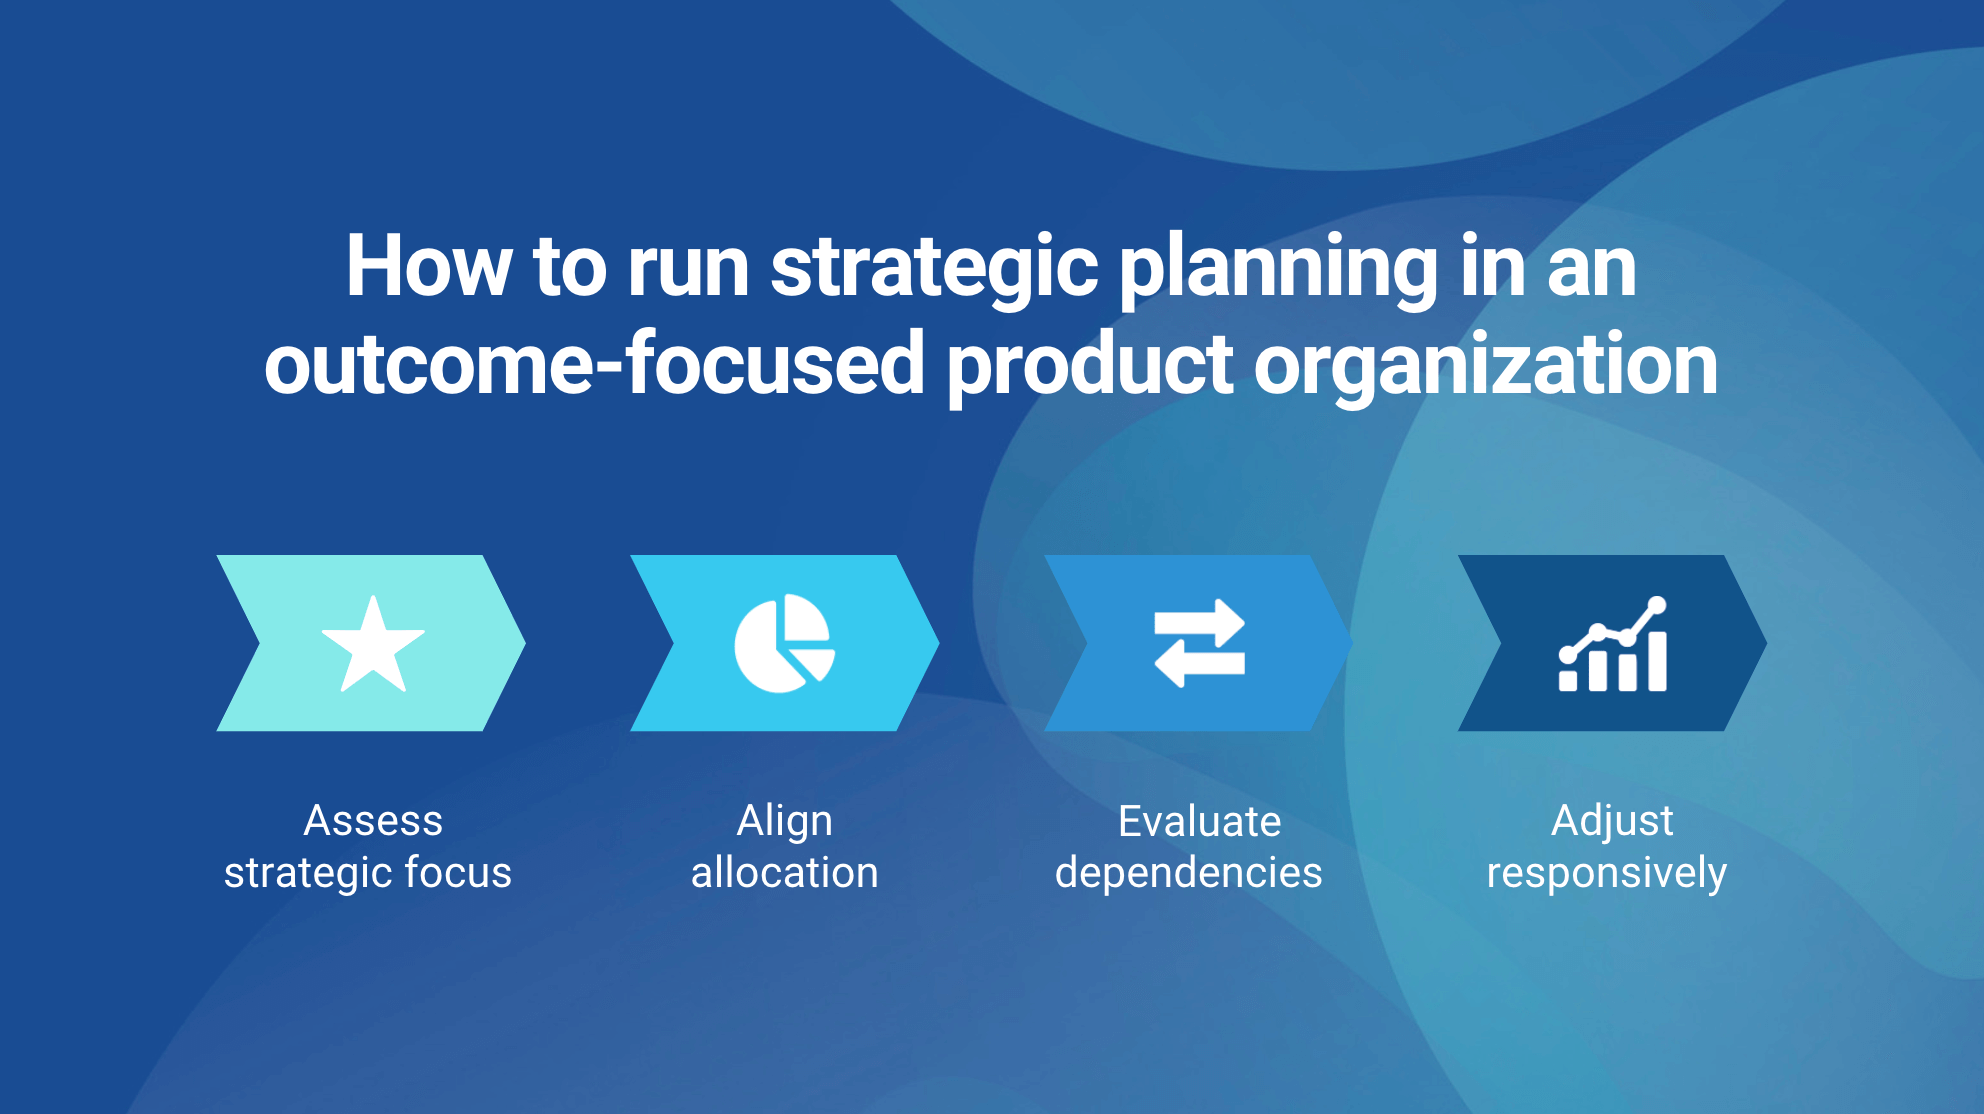 How to run strategic planning in an outcome-focused product organization